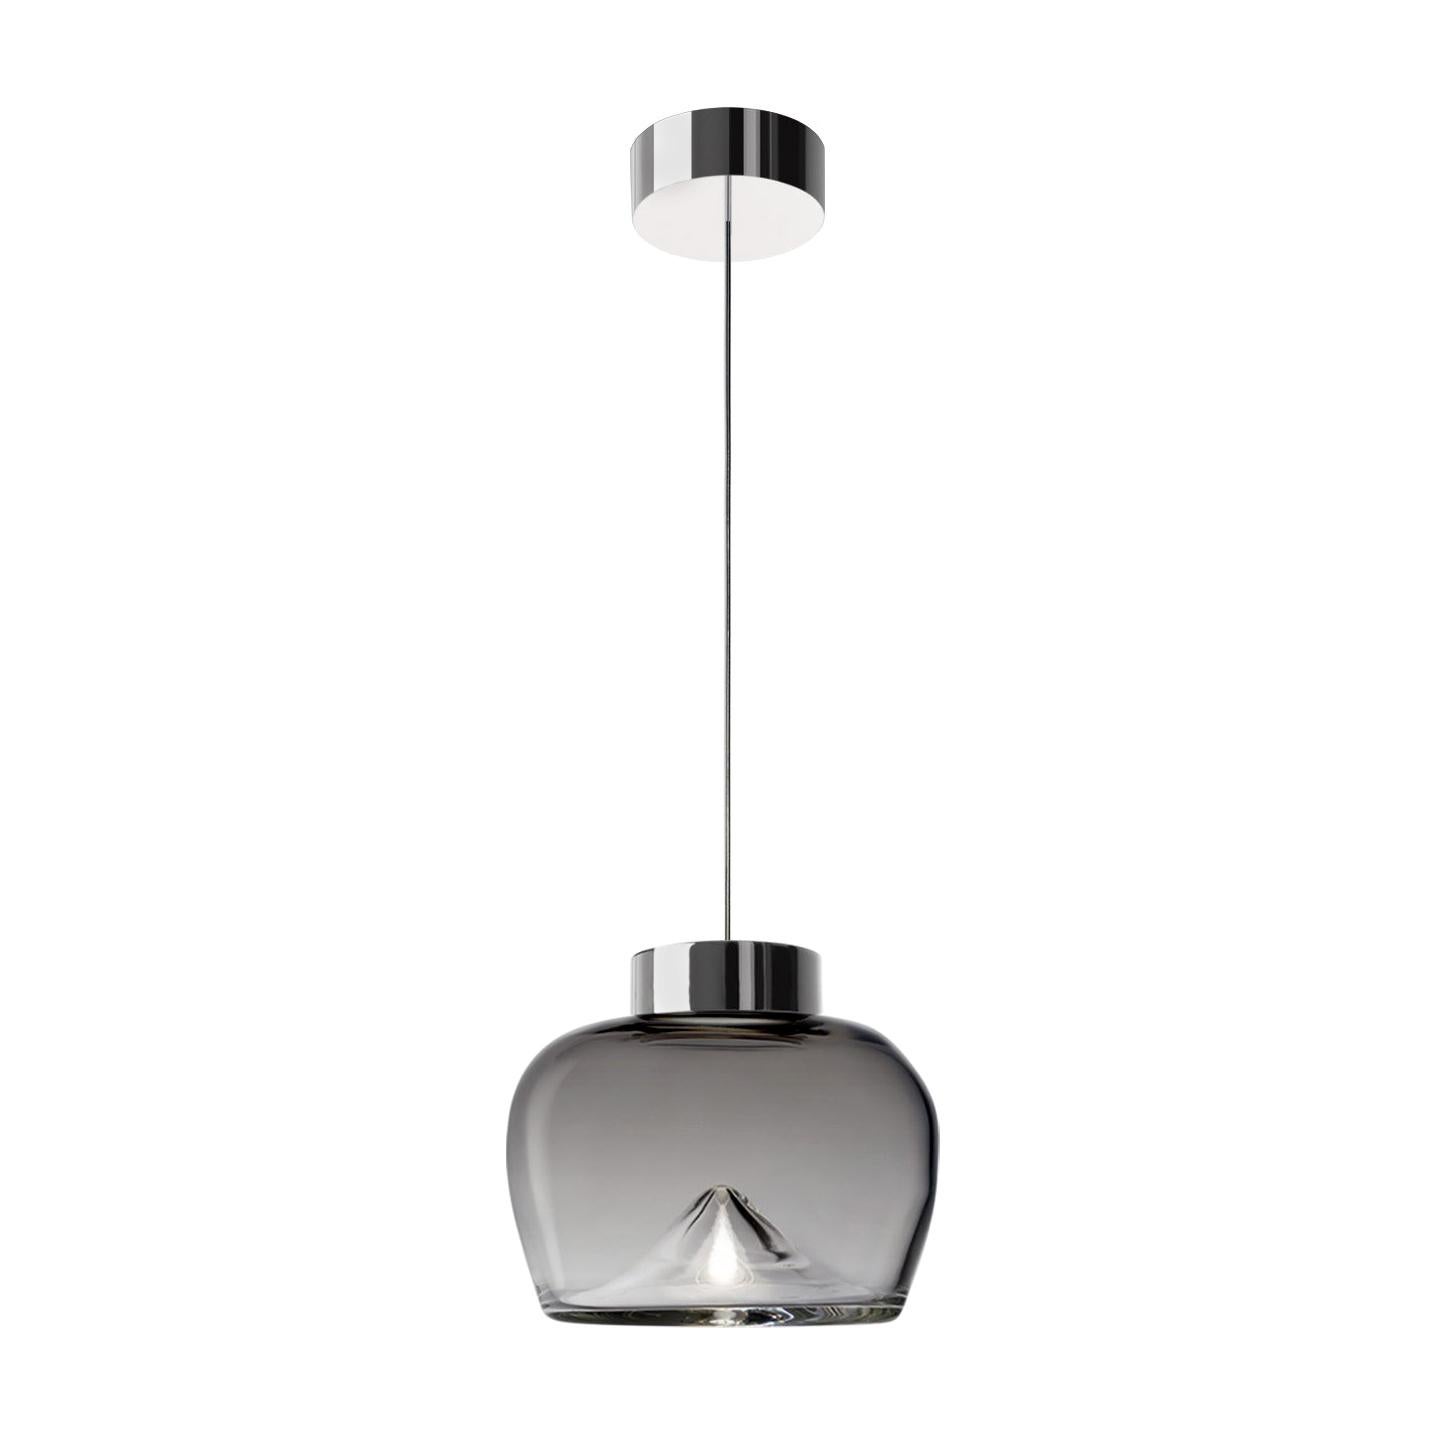 Leucos Aella Bold S LED Pendant Light in Smoke Gray and Chrome by Toso & Massari For Sale